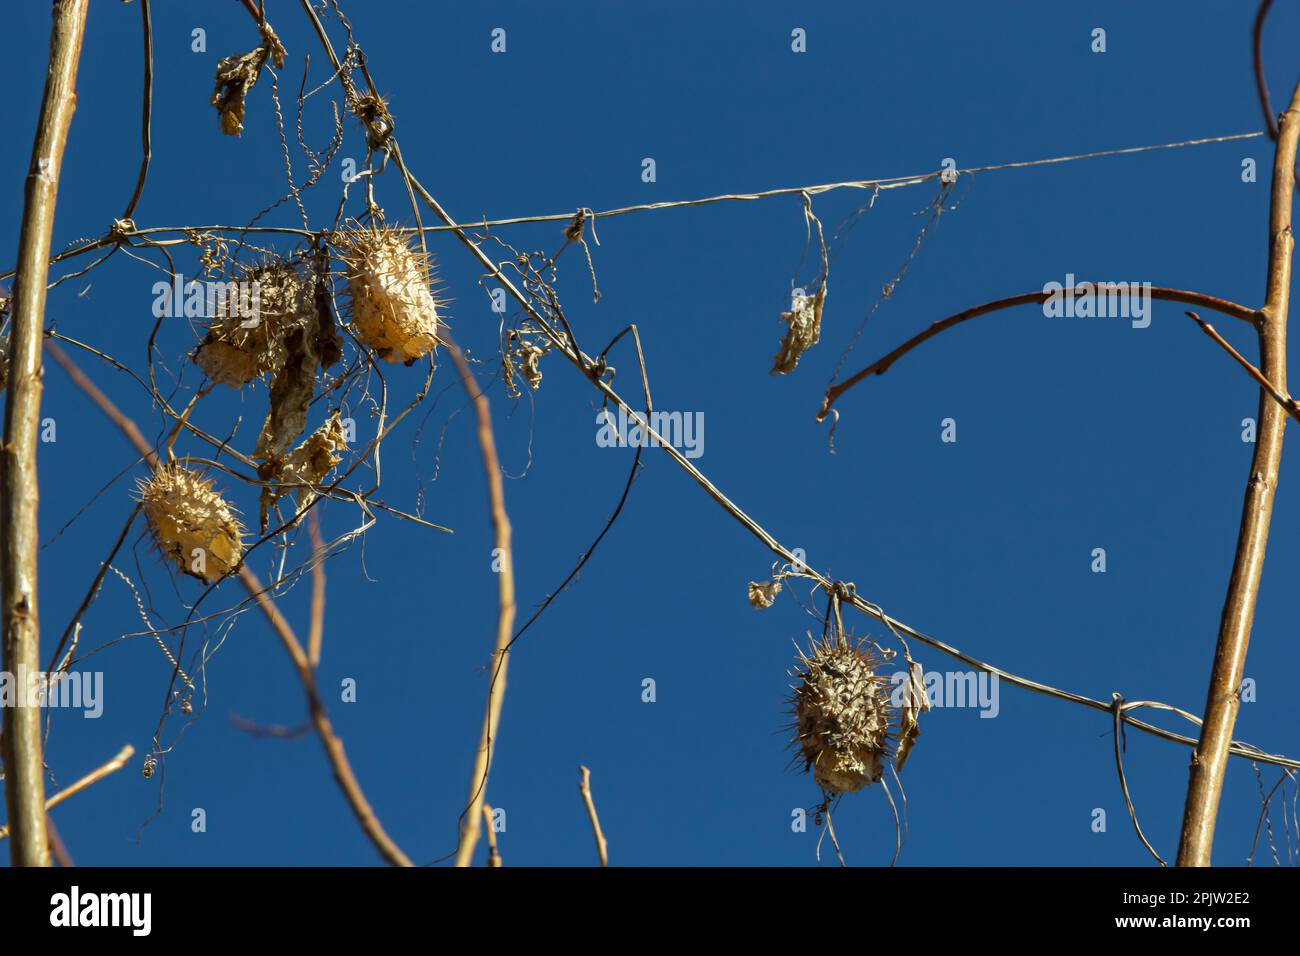 Dry spiny lobe Echinocystis lobata in winter. Dry fruits with seeds overwinter hanging on the branches of bushes. Stock Photo